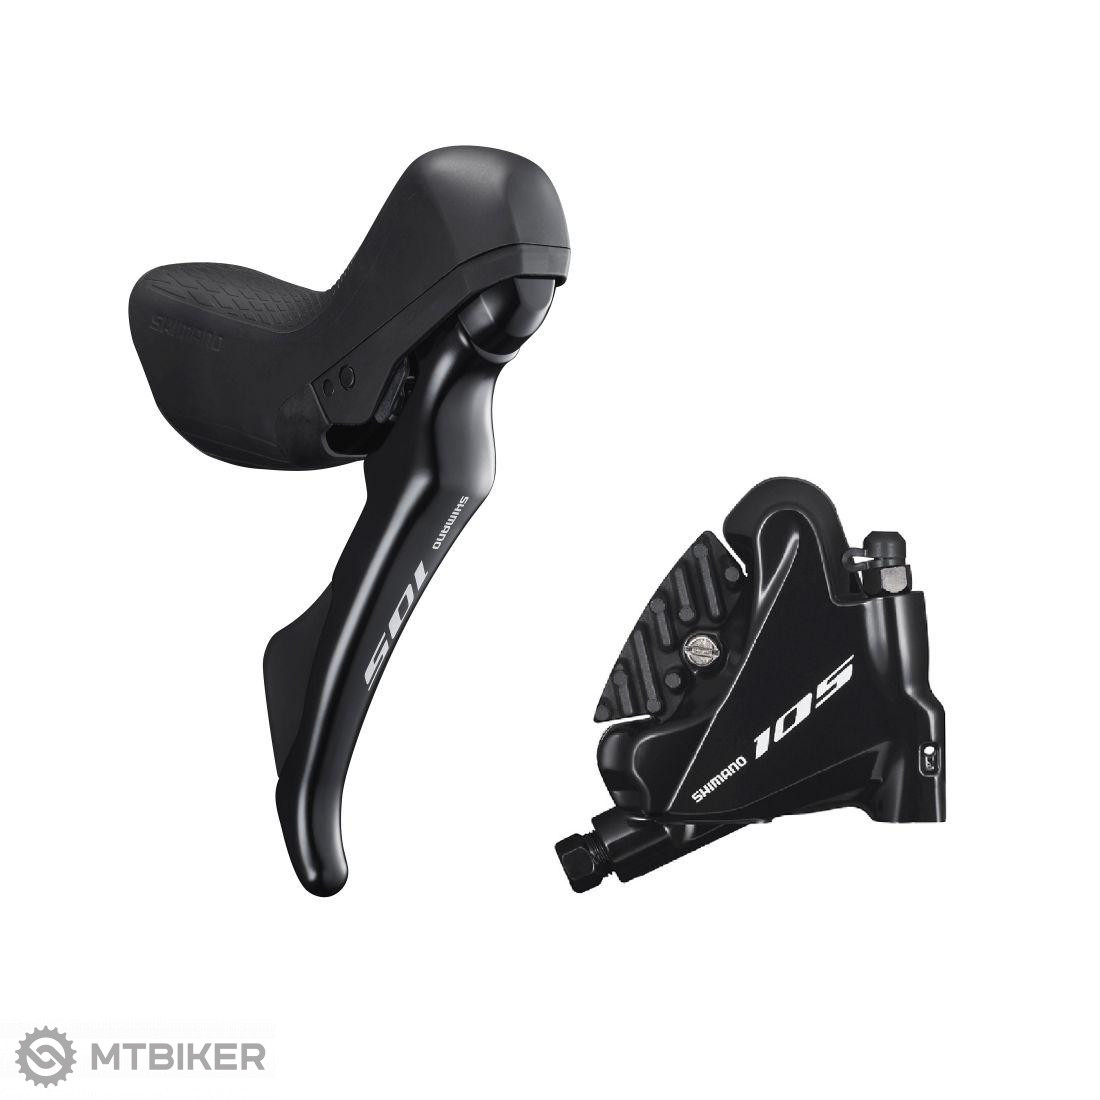 Shimano 105 ST-R7020/BR-R7070 Dual Control shifting/hydr. brake, 11-speed, right, Flat Mount, 1700 mm plates - MTBIKER.shop